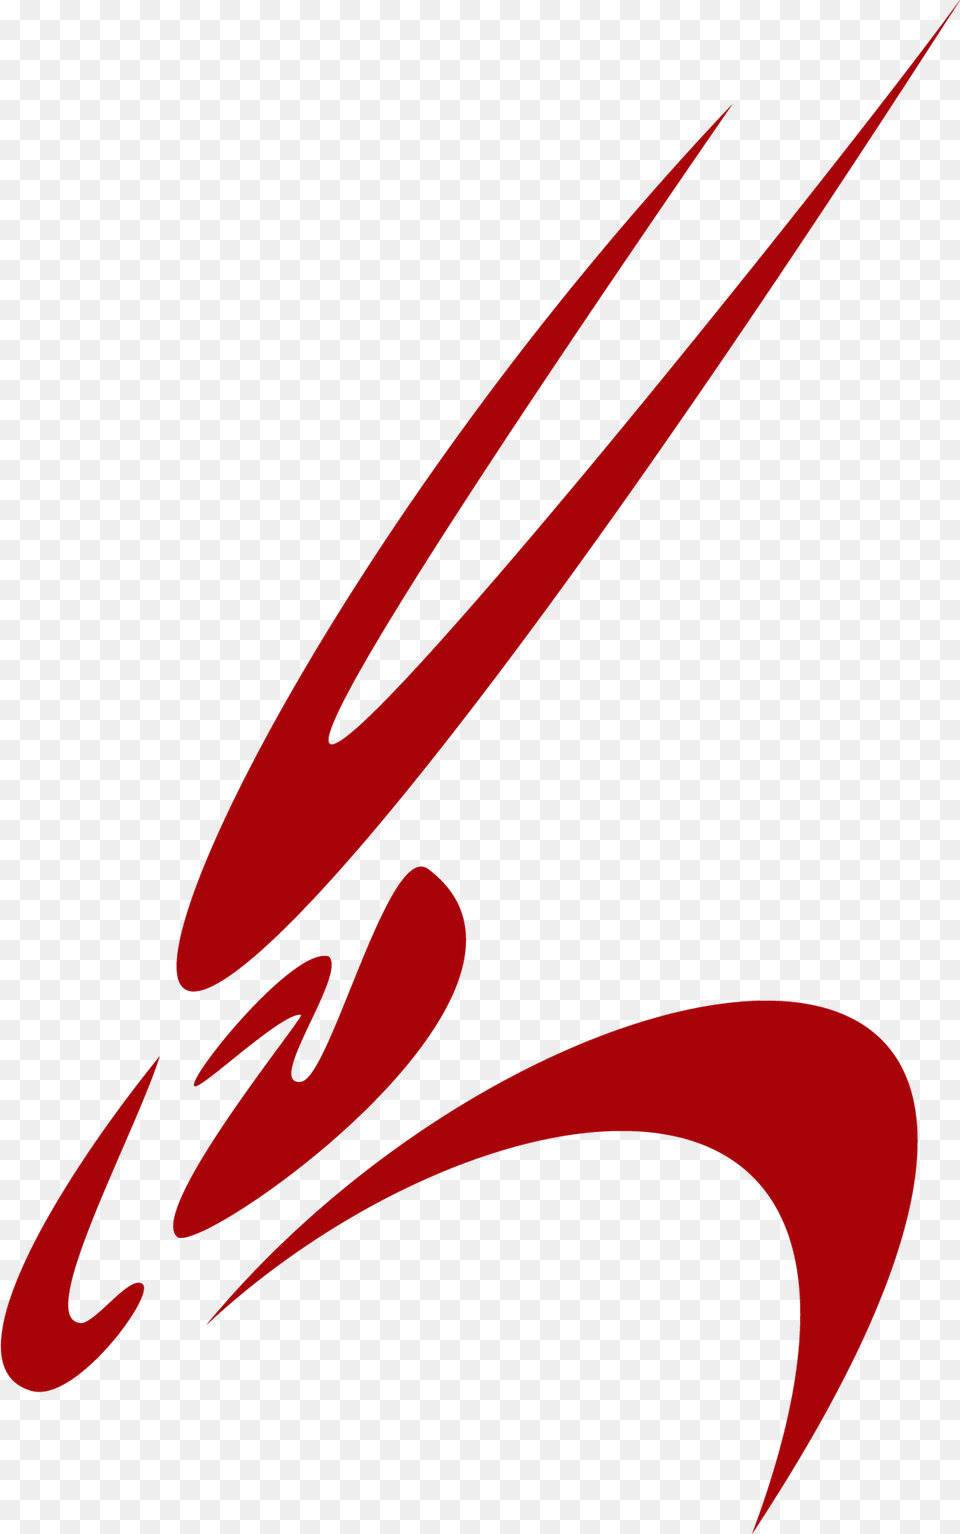 Free Red Abstract Lines Red Line Designs, Logo, Animal, Fish, Sea Life Png